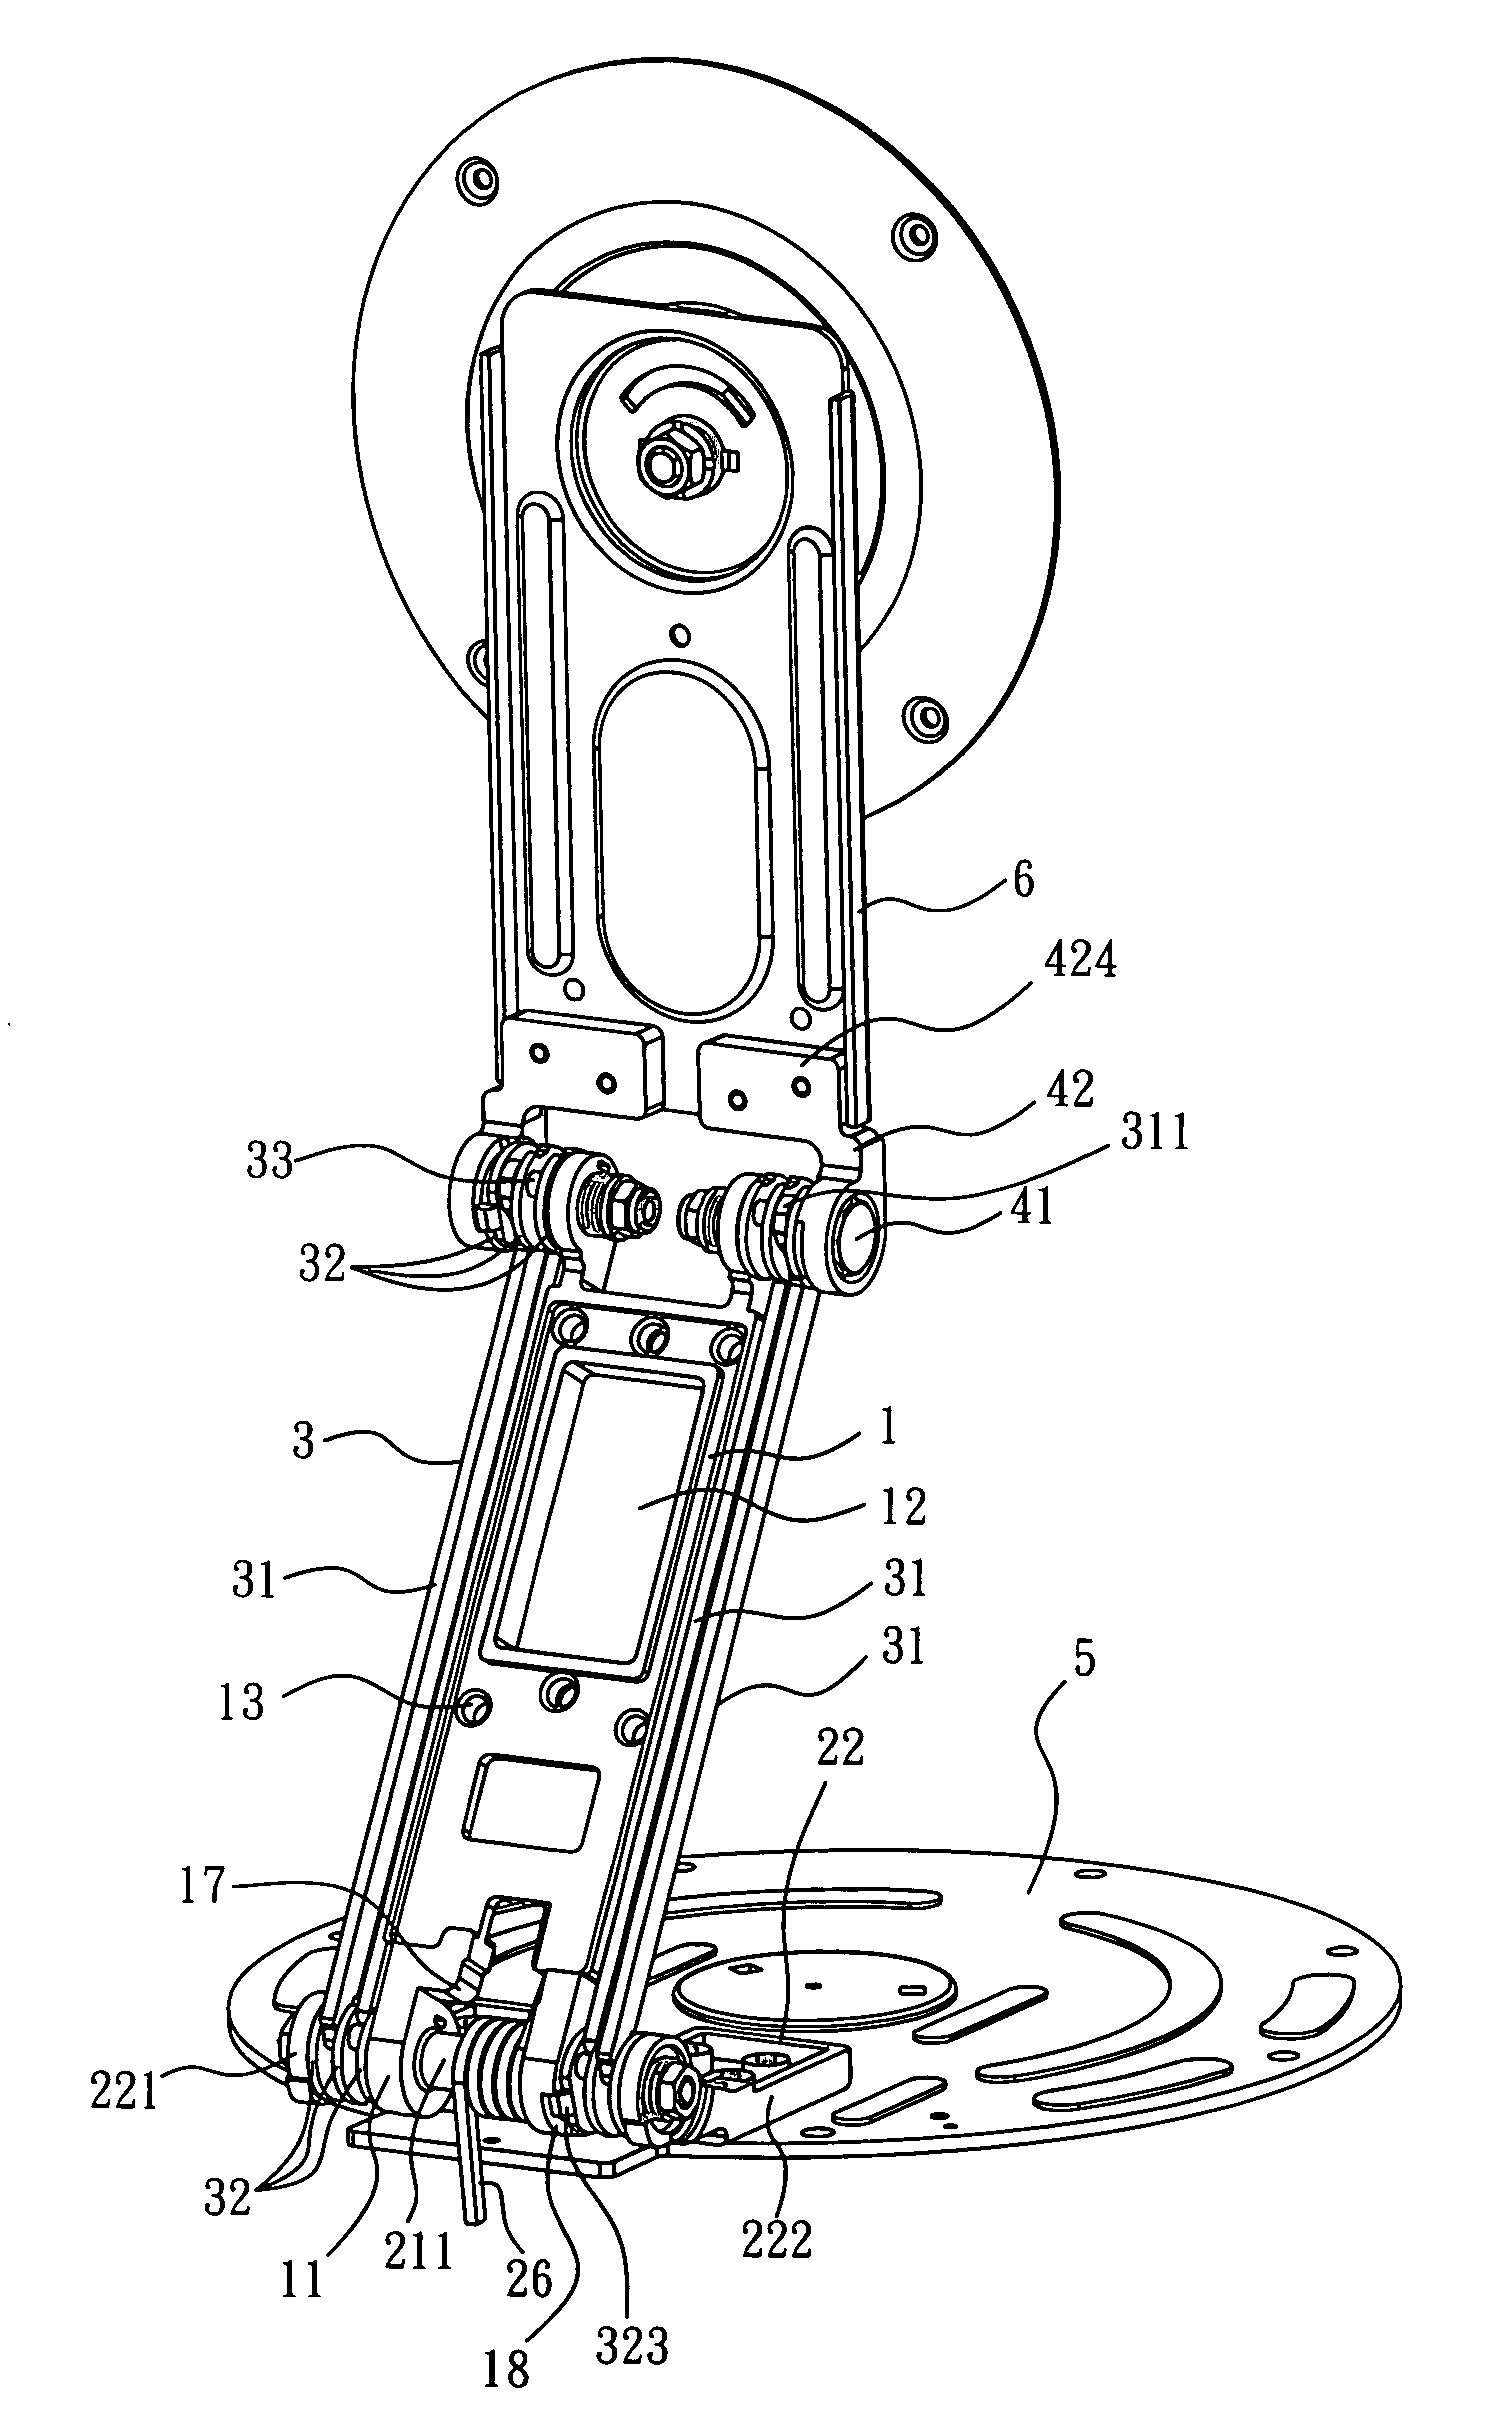 Axle mechanism capable of adjusting an elevation